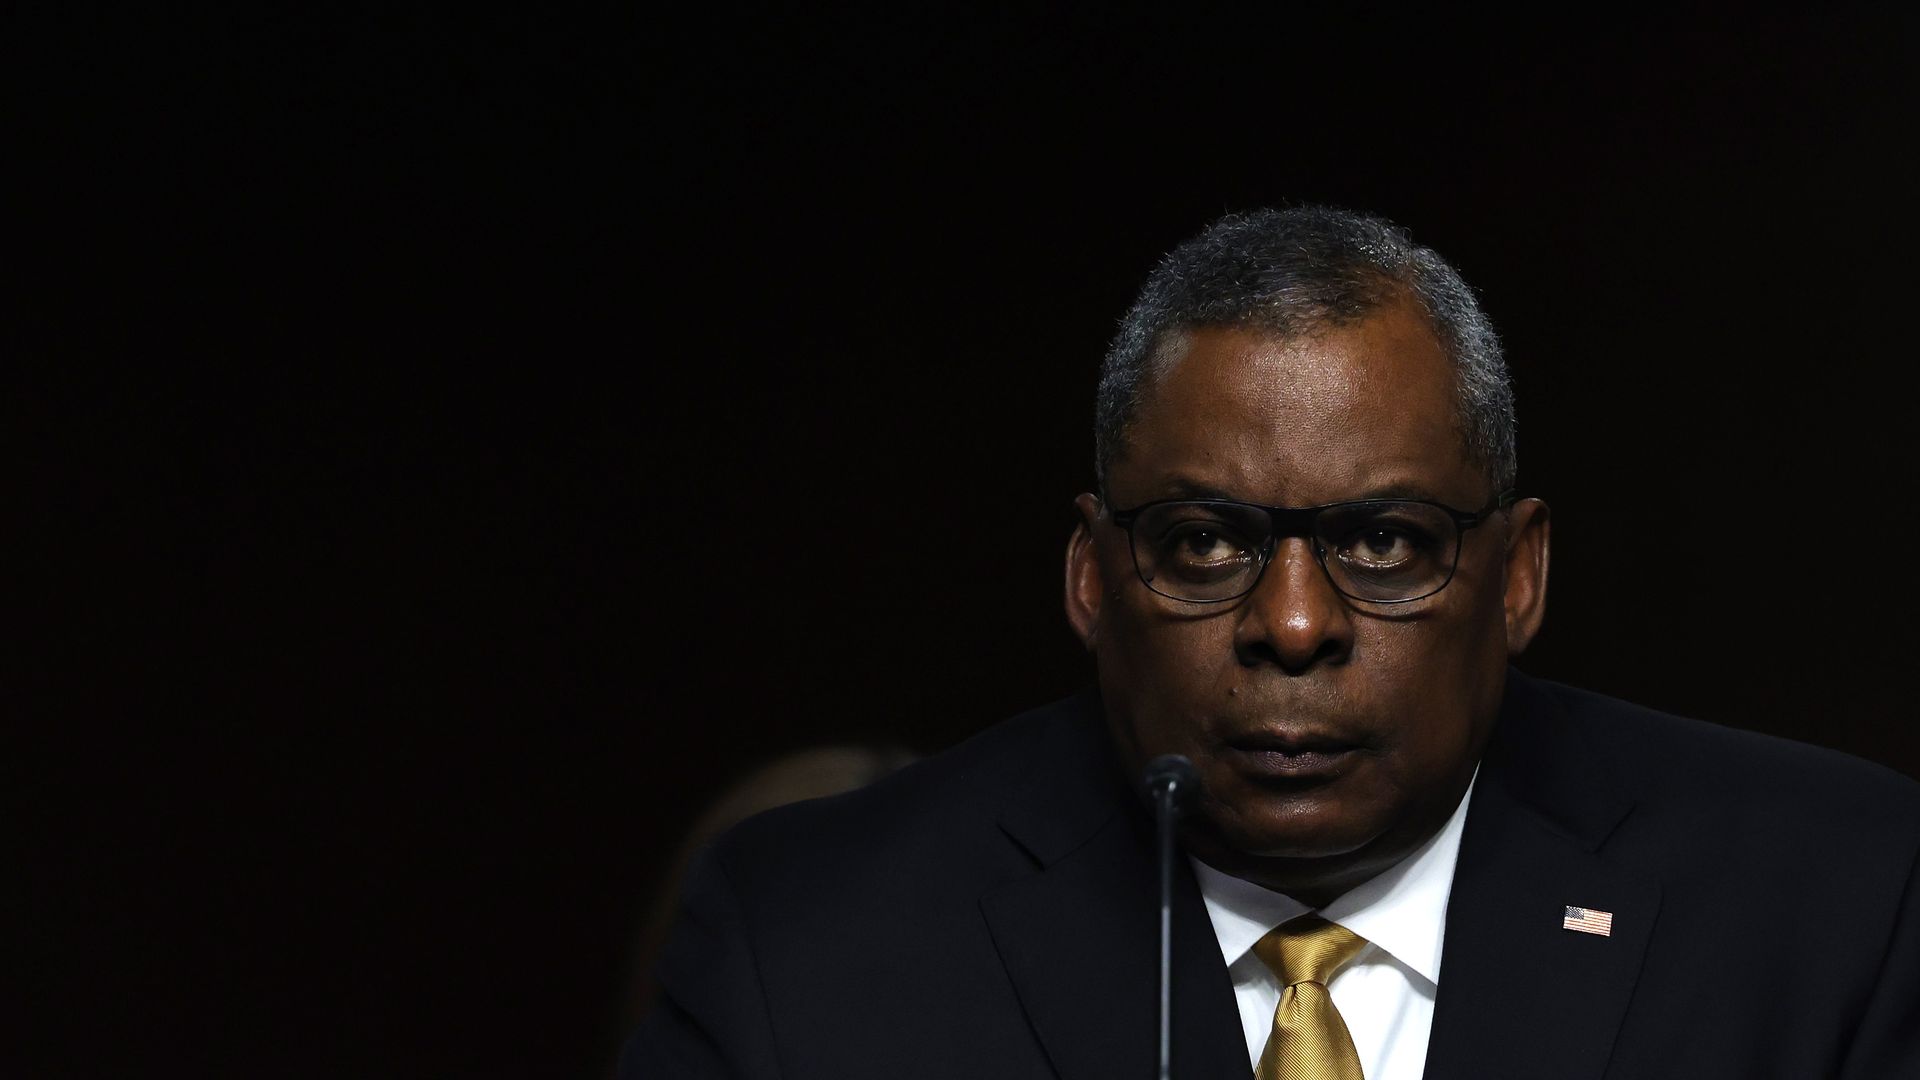 Secretary of Defense Lloyd Austin listens during a hearing with the Senate Armed Services Committee on Capitol Hill on June 10